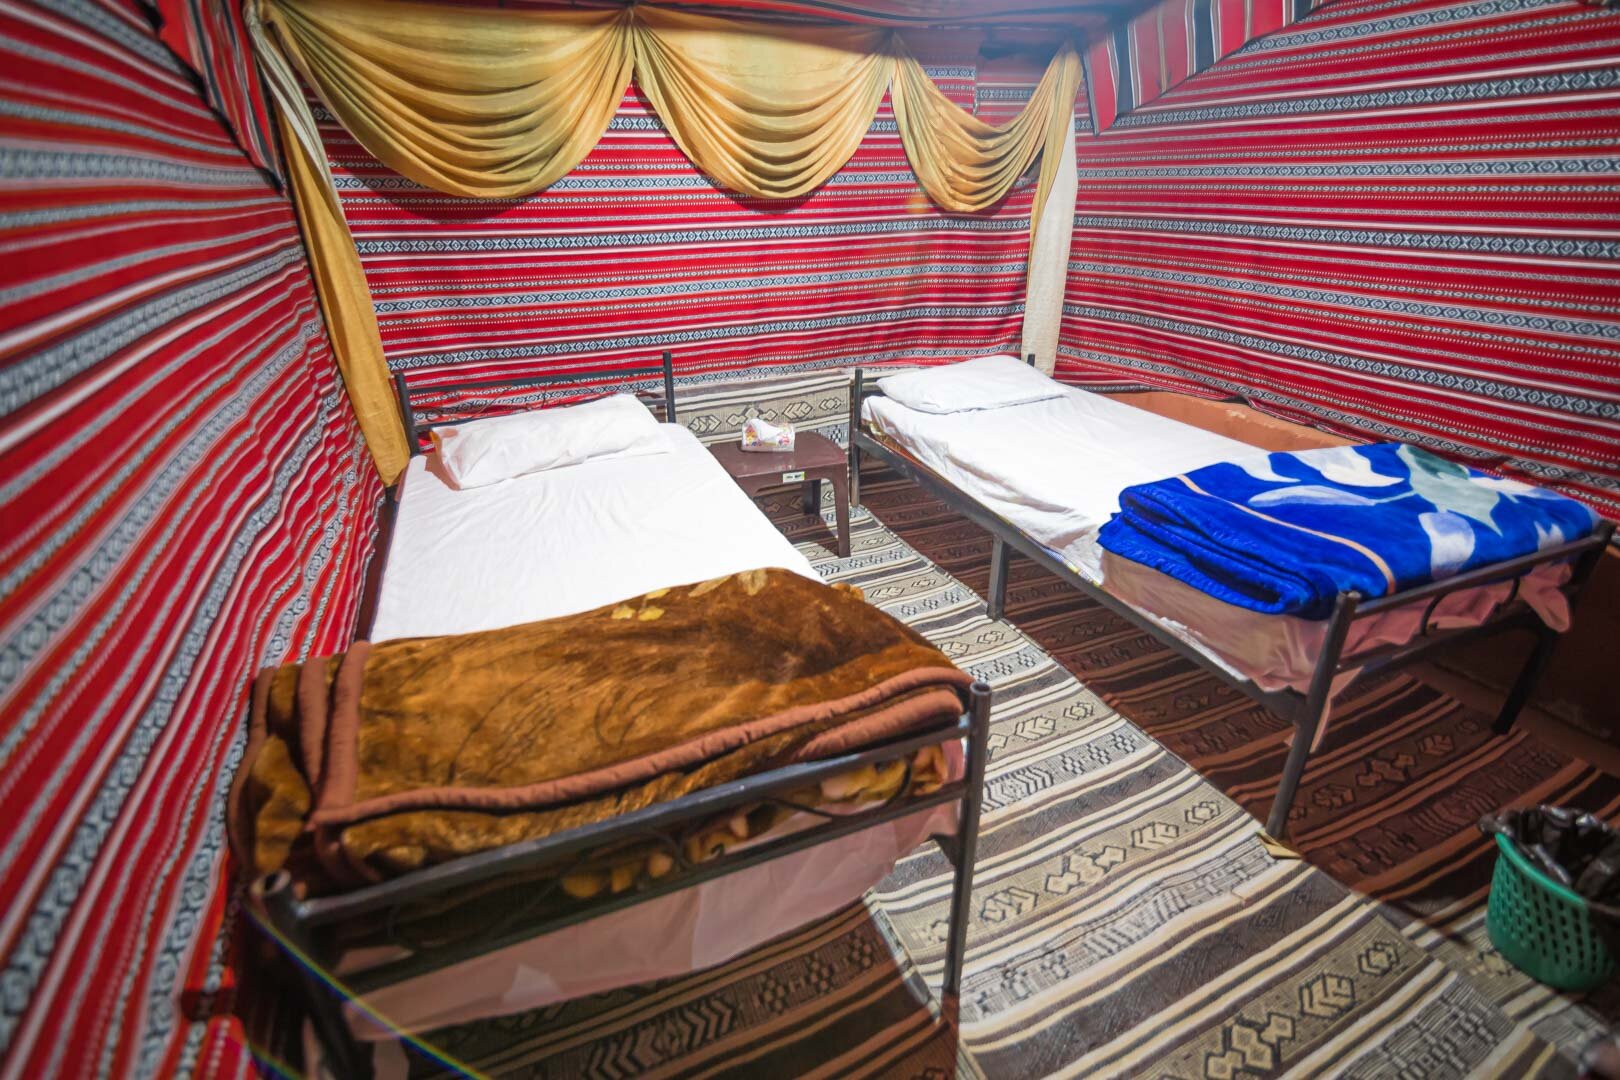 Photograph of the Beds inside the Tents at the Wadi Rum Campsite in Jordan by Jordan Photographer Rashad Anabtawi